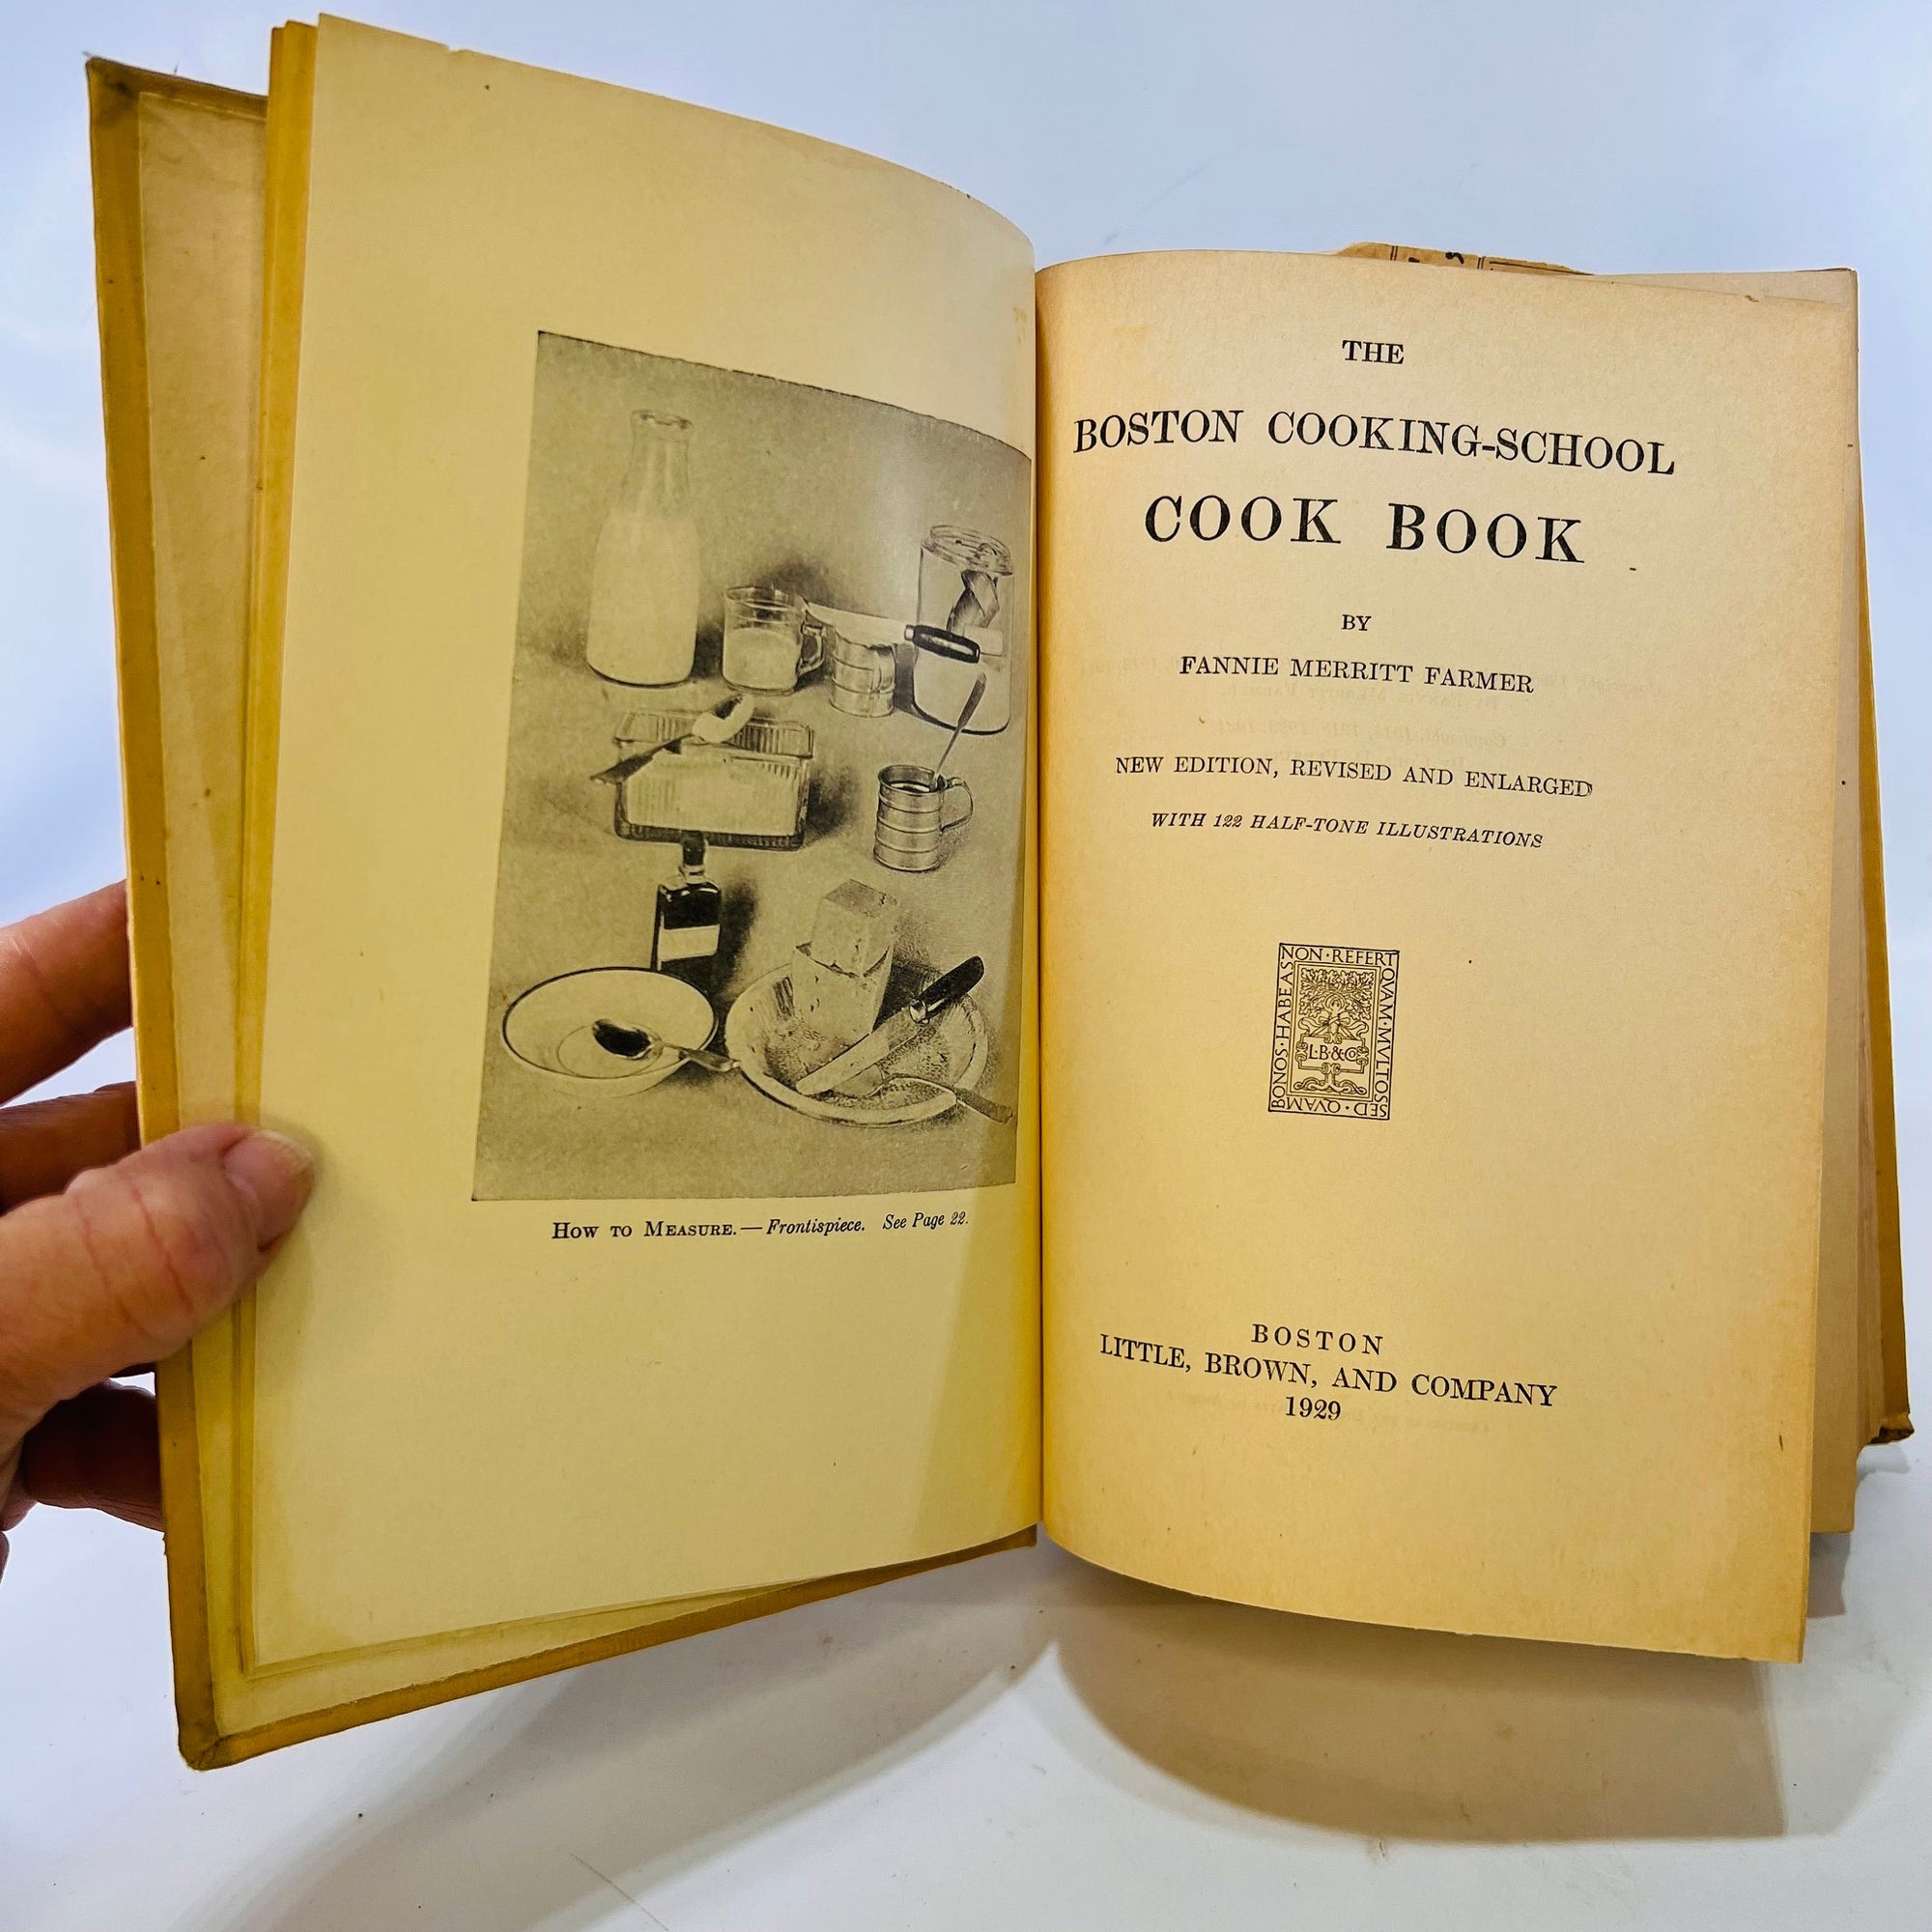 The Boston Cooking-School Cookbook by Fannie Merritt Farmer 1929 Little Brown and Company  Vintage Cookbook